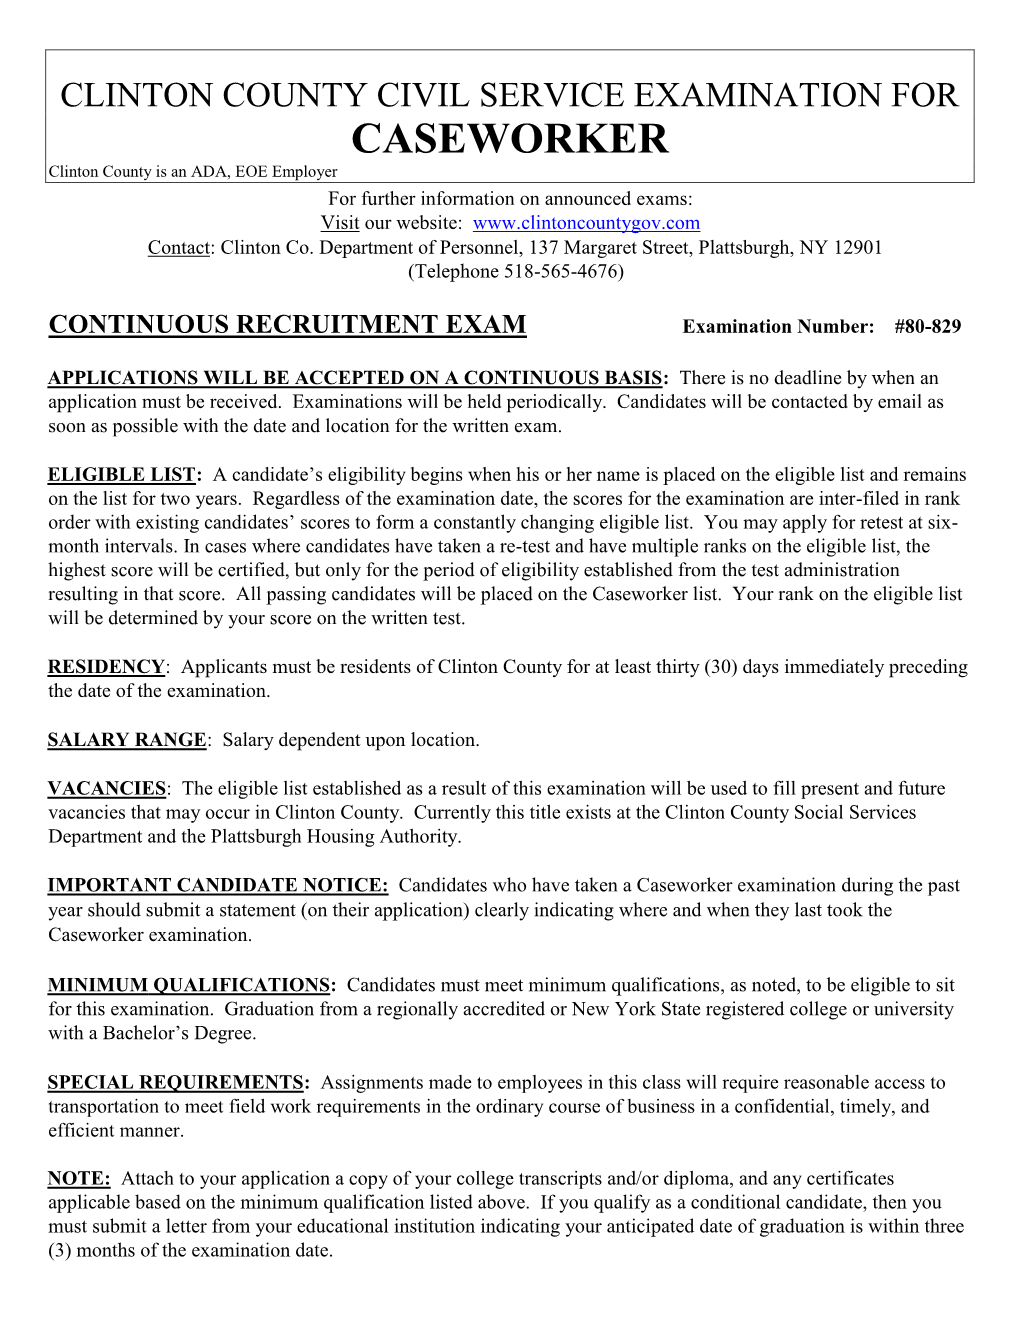 CASEWORKER Clinton County Is an ADA, EOE Employer for Further Information on Announced Exams: Visit Our Website: Contact: Clinton Co